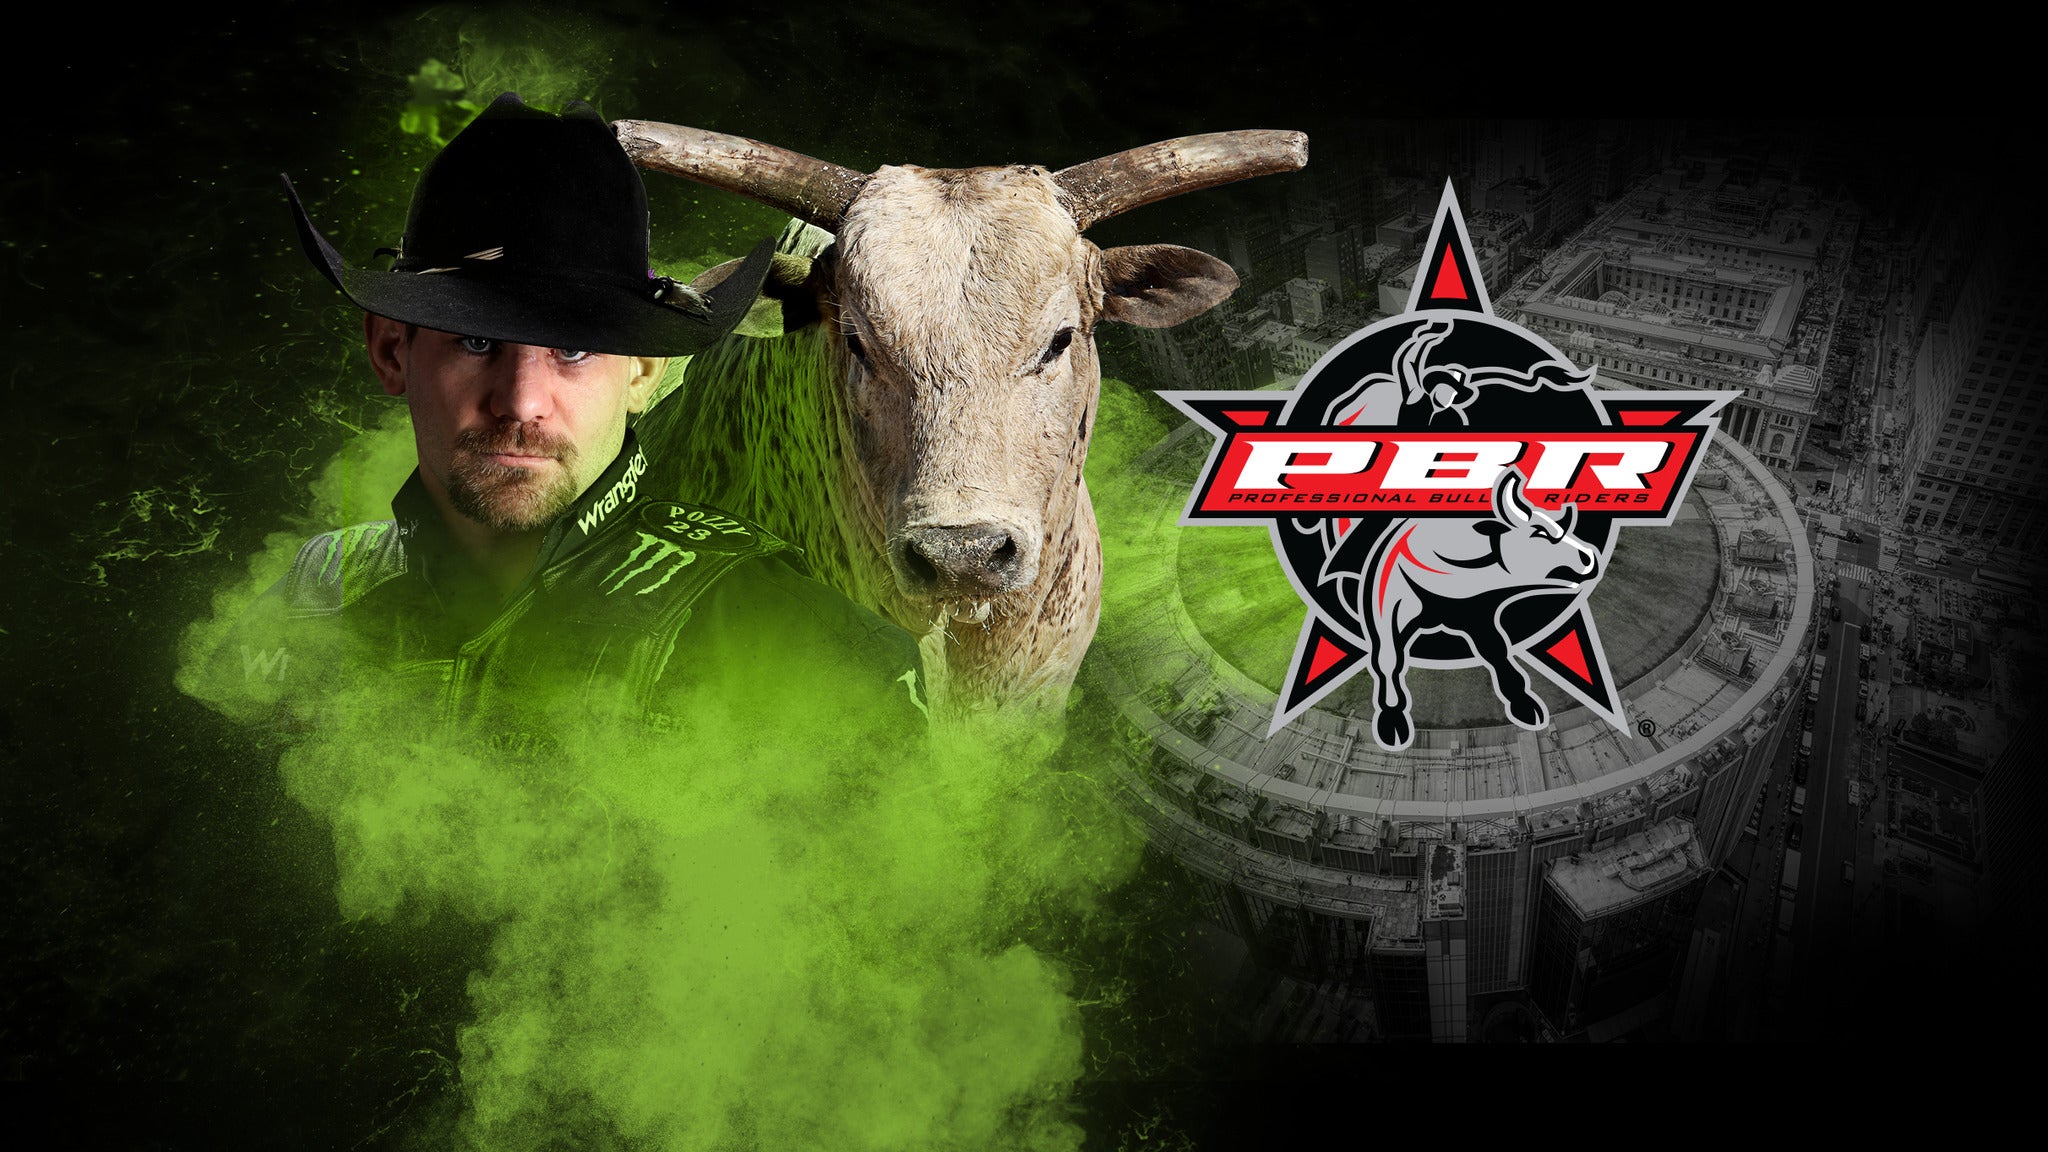 PBR Unleash the Beast tickets, presale info and more Box Office Hero